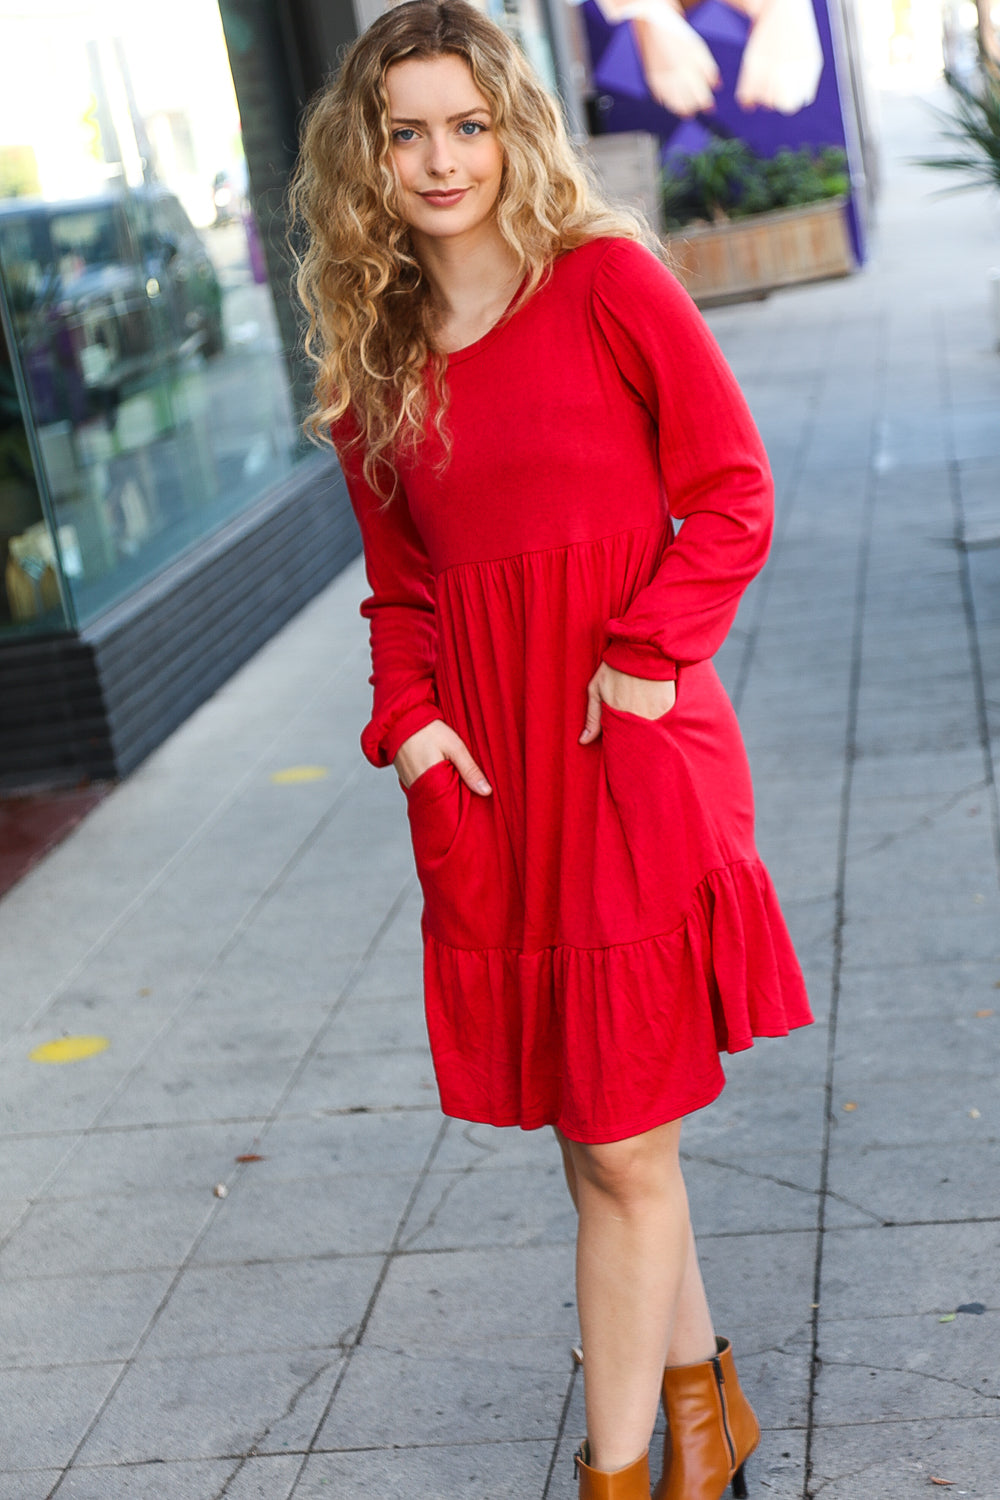 Lady In Red Hacci Fit & Flare Ruffle Dress Haptics